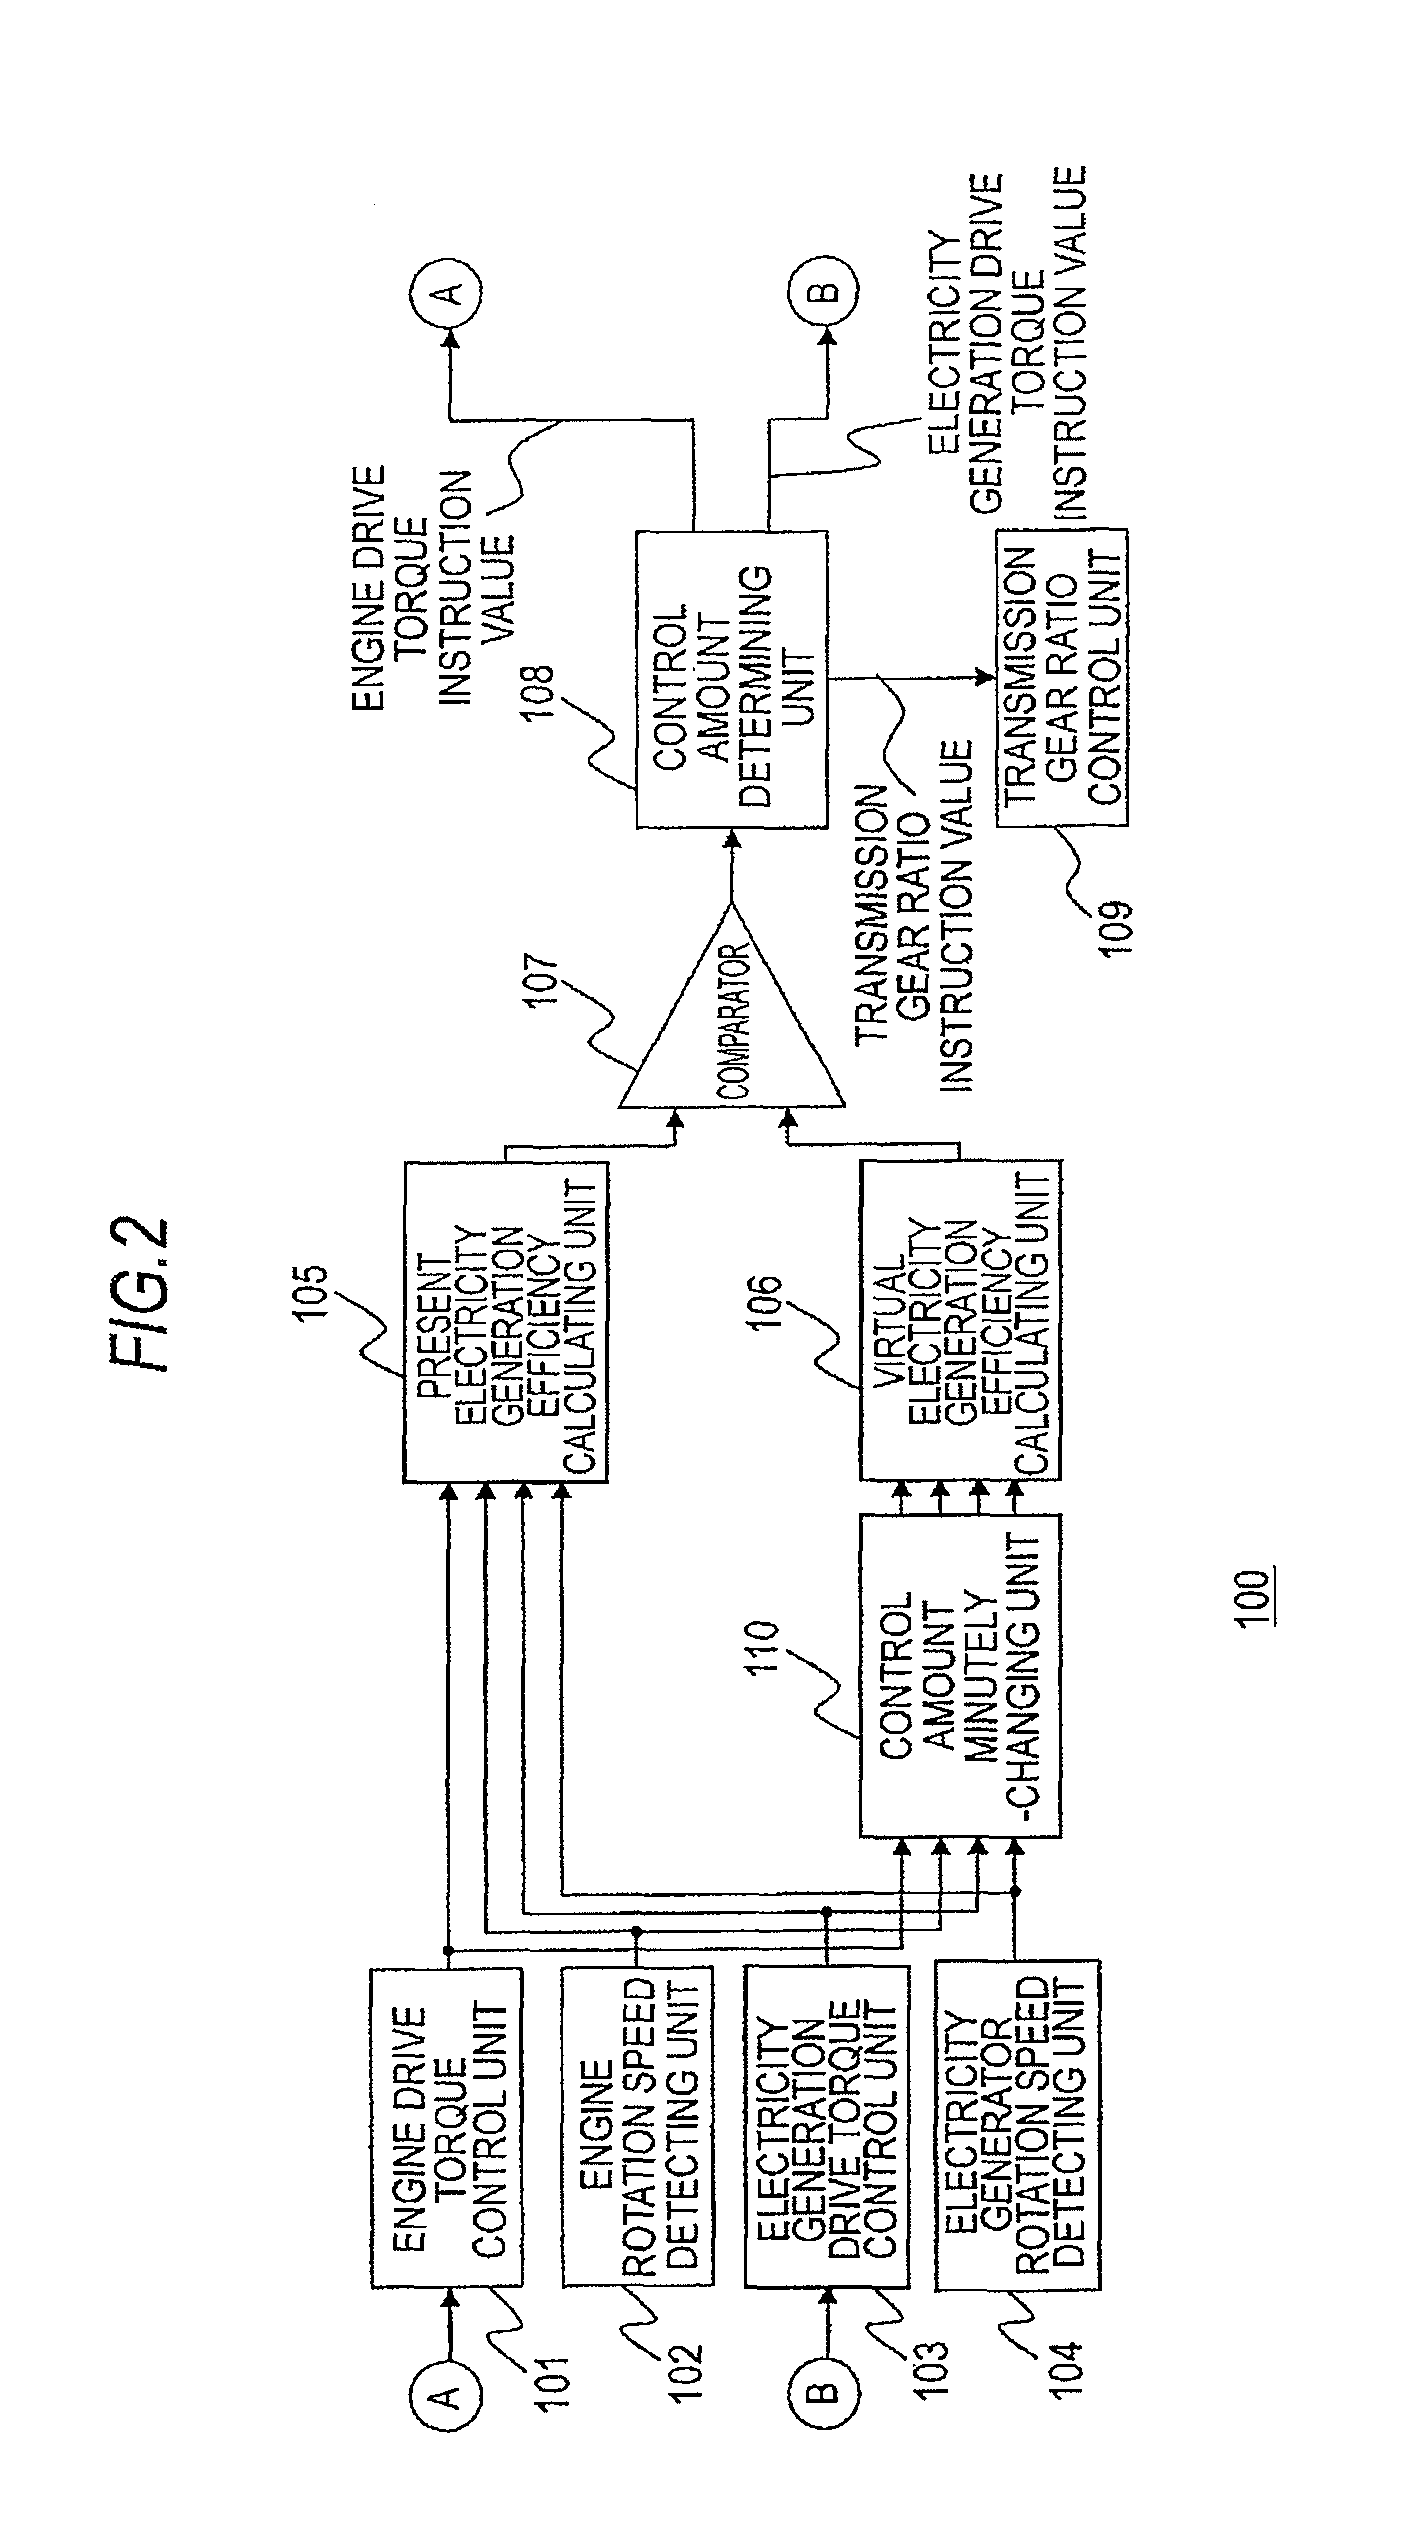 Electricity generation control device for vehicle